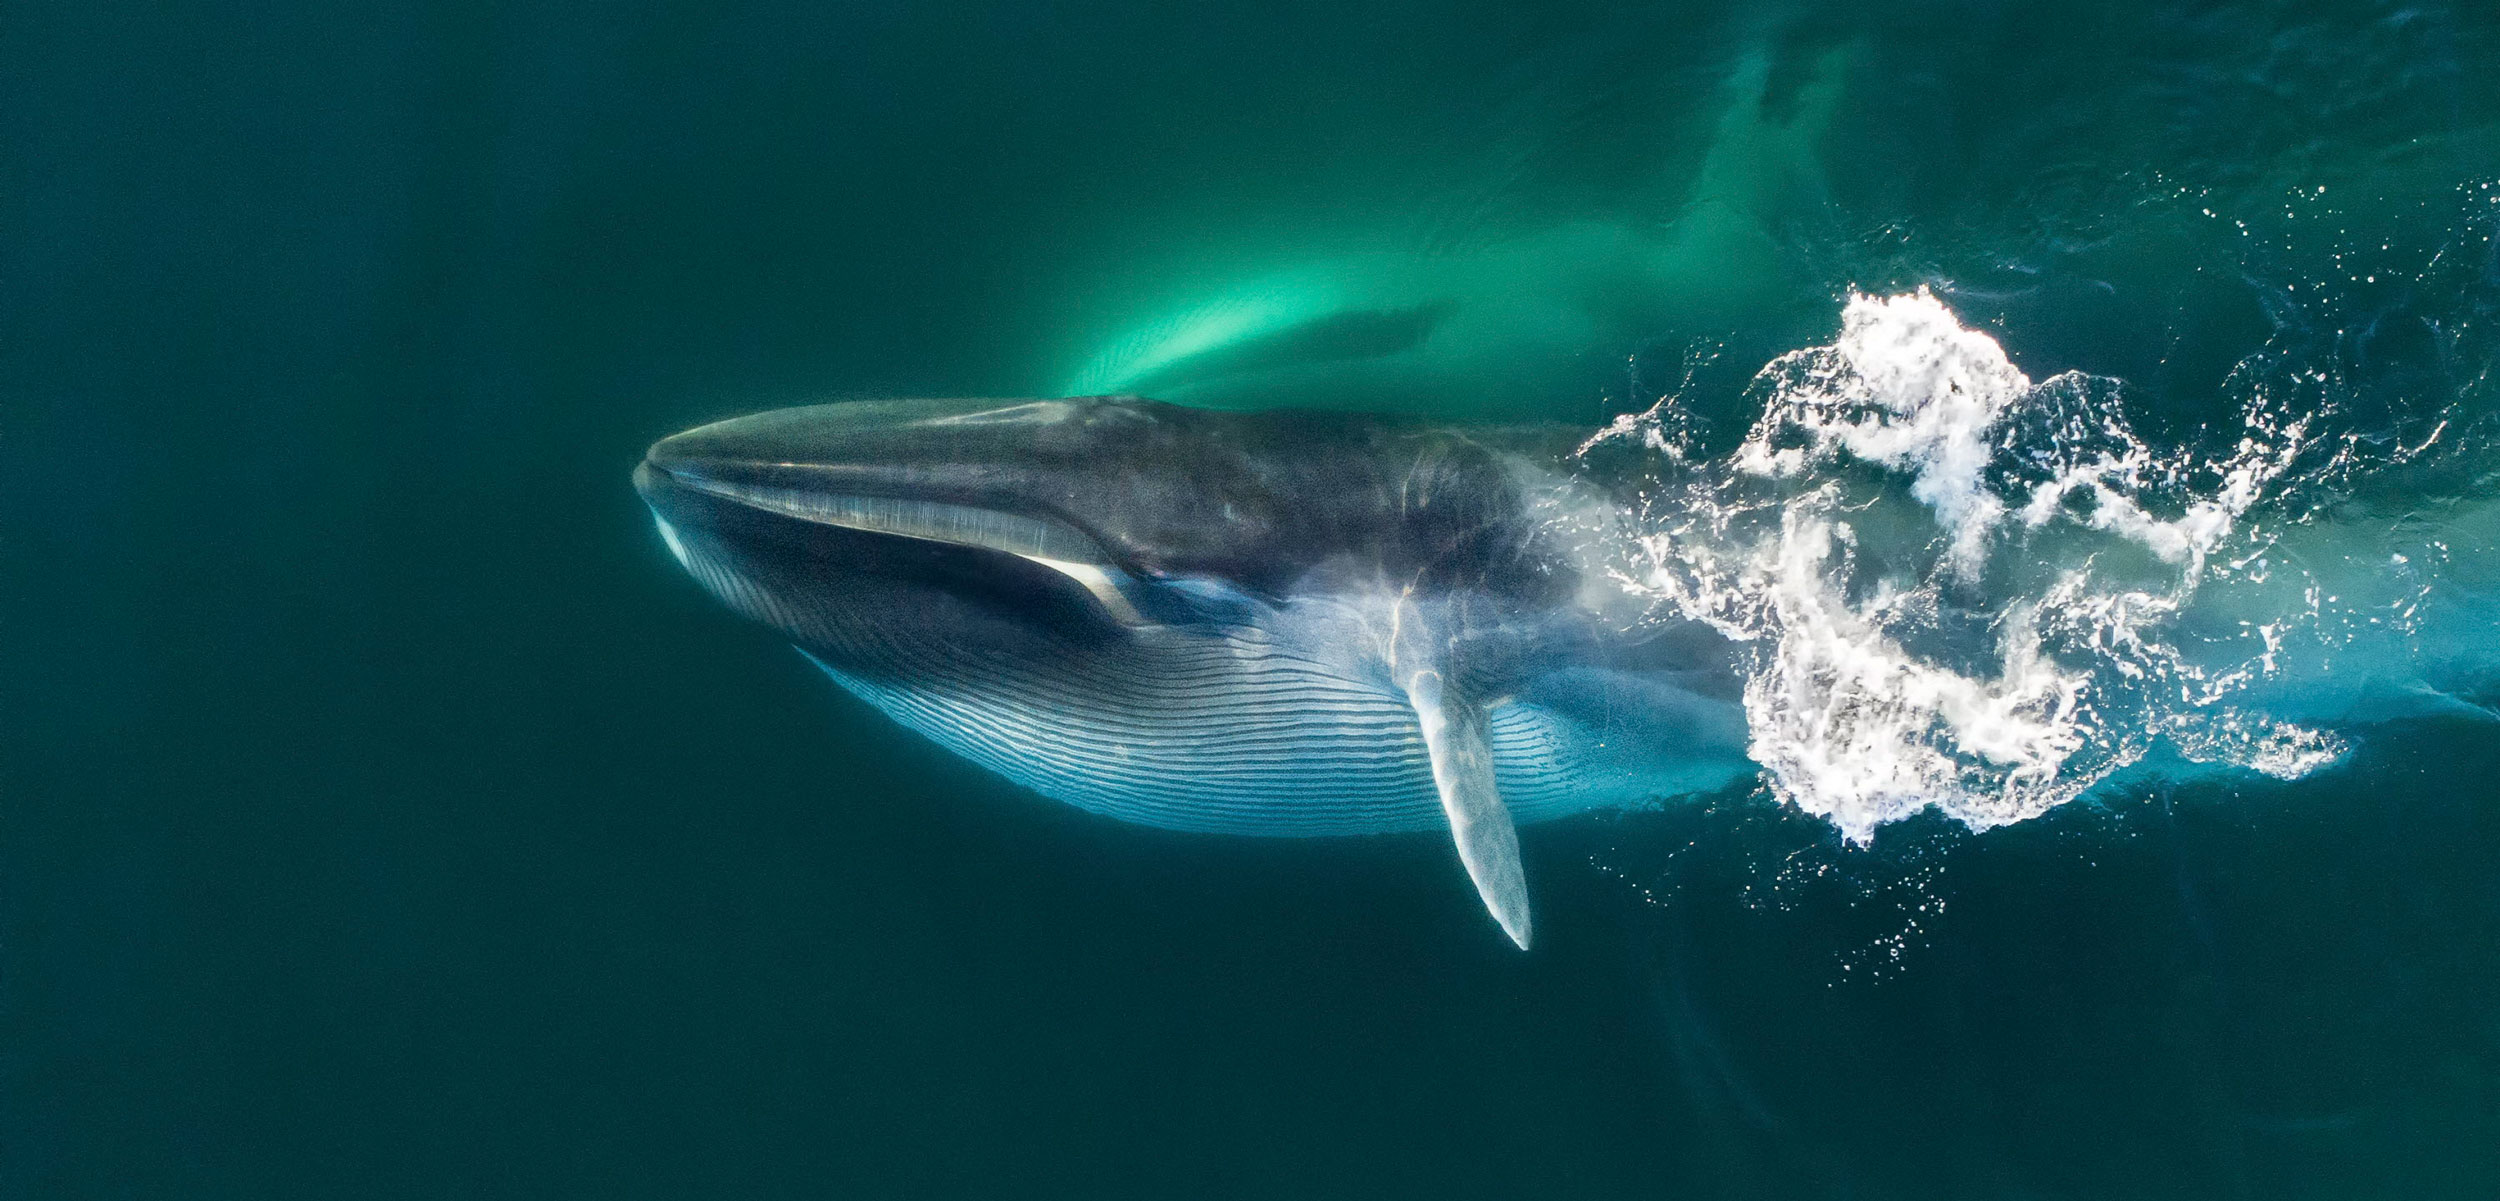 Aerial view of Fin whale (Balaenoptera physalus) lunge-feeding